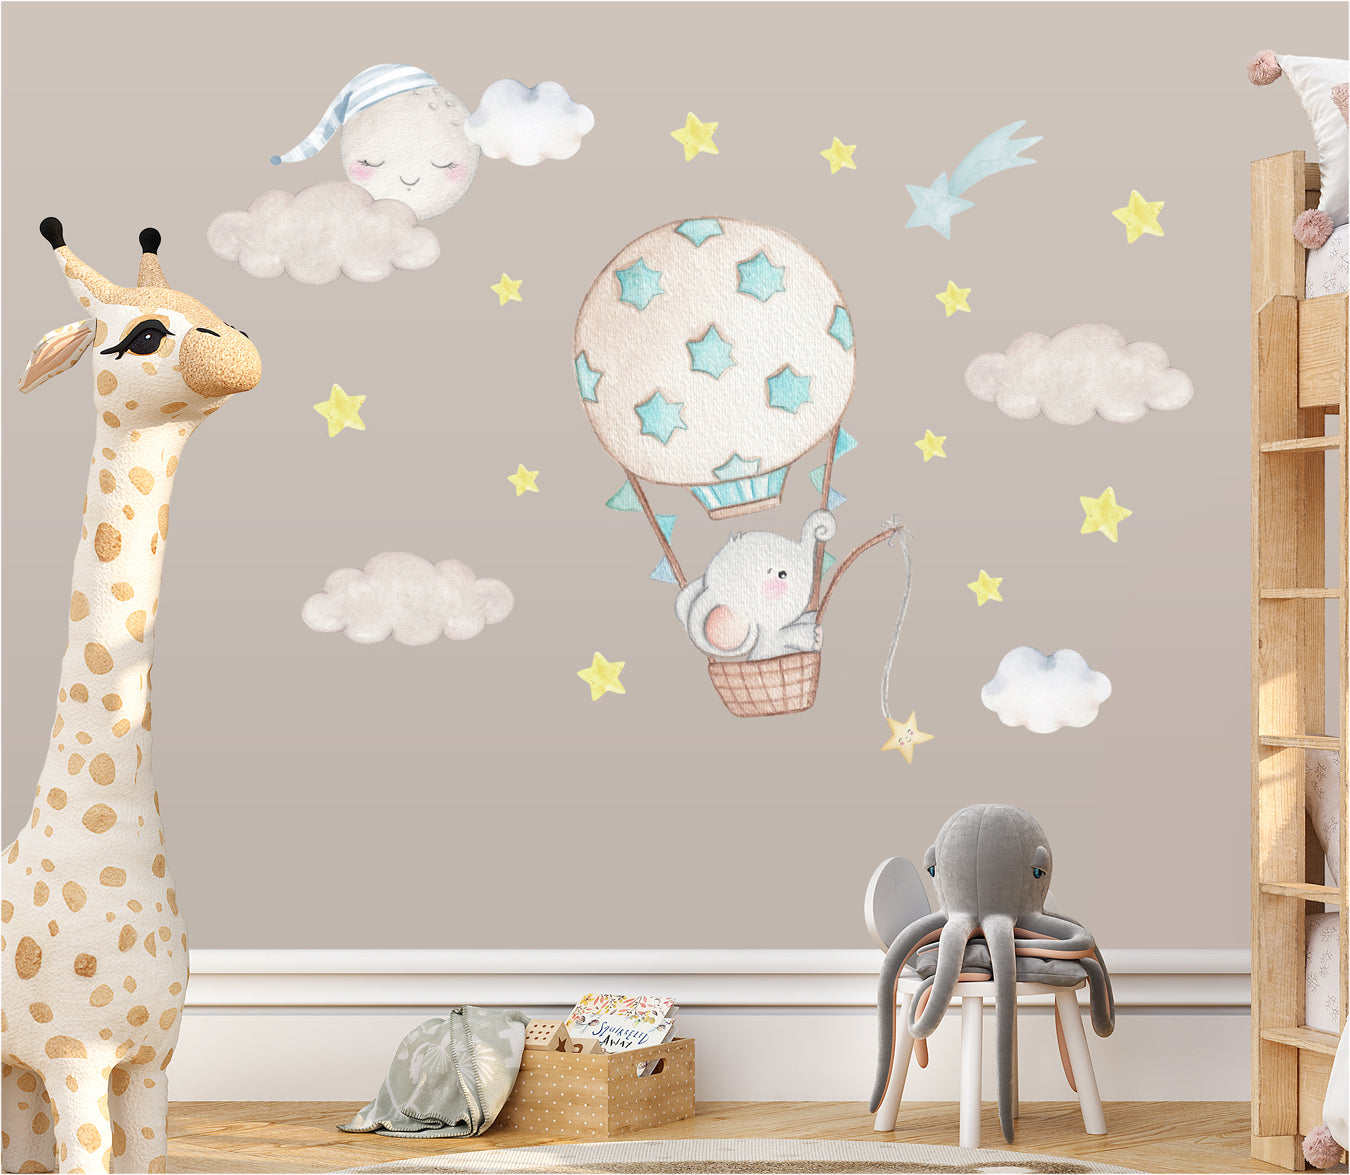 The elephant in the balloon. Wall decals for a baby room. Yellow stars.